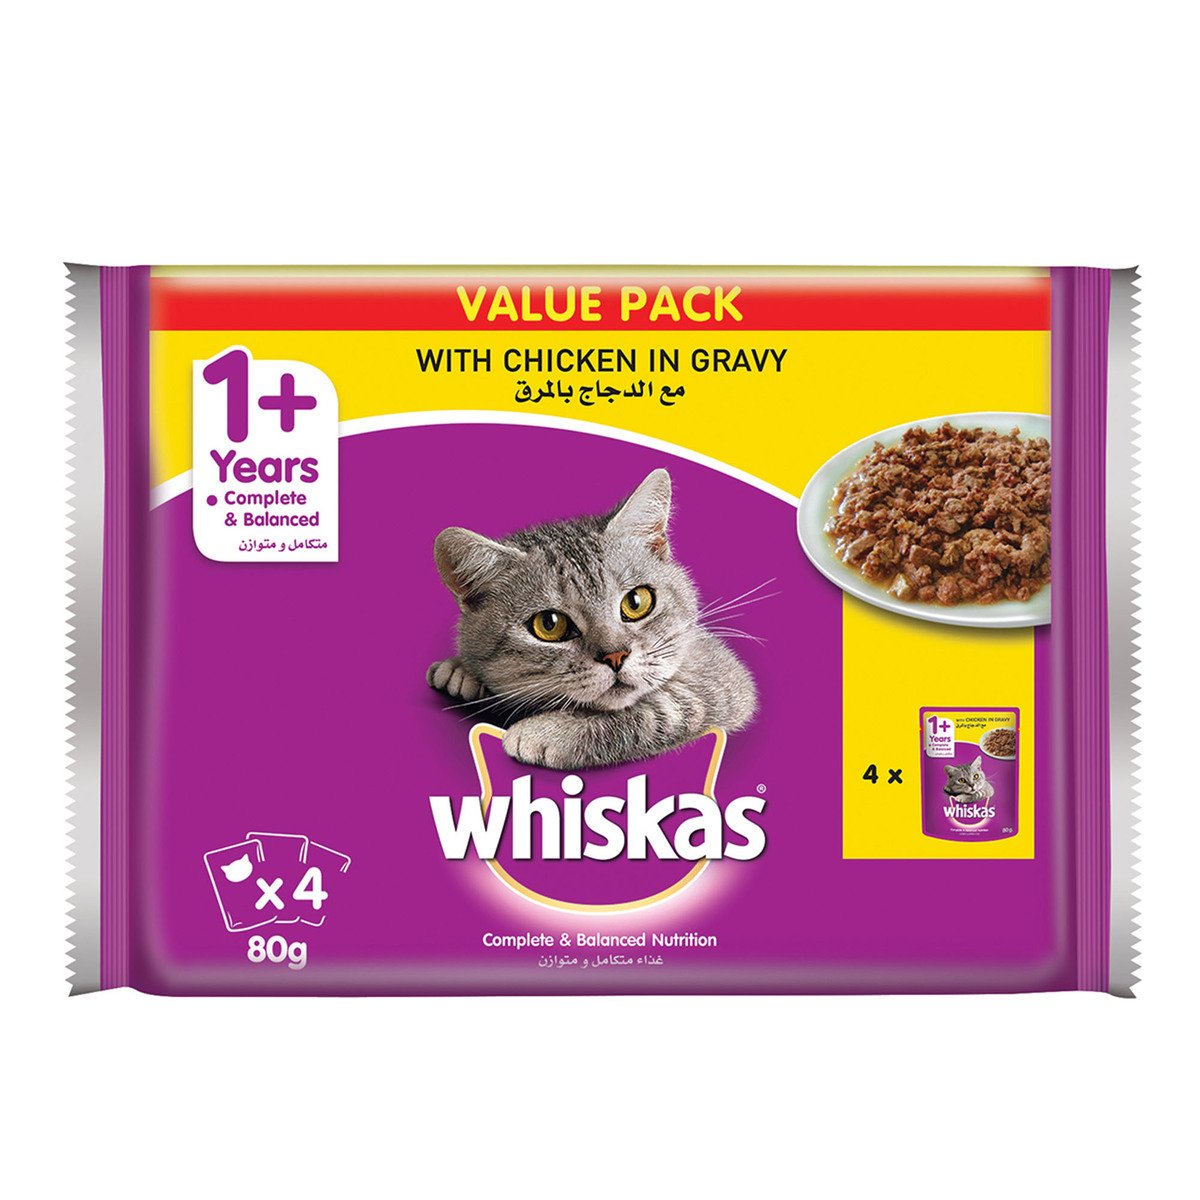 Whiskas Catfood With Chicken In Gravy For 1+ Years 4 x 80g